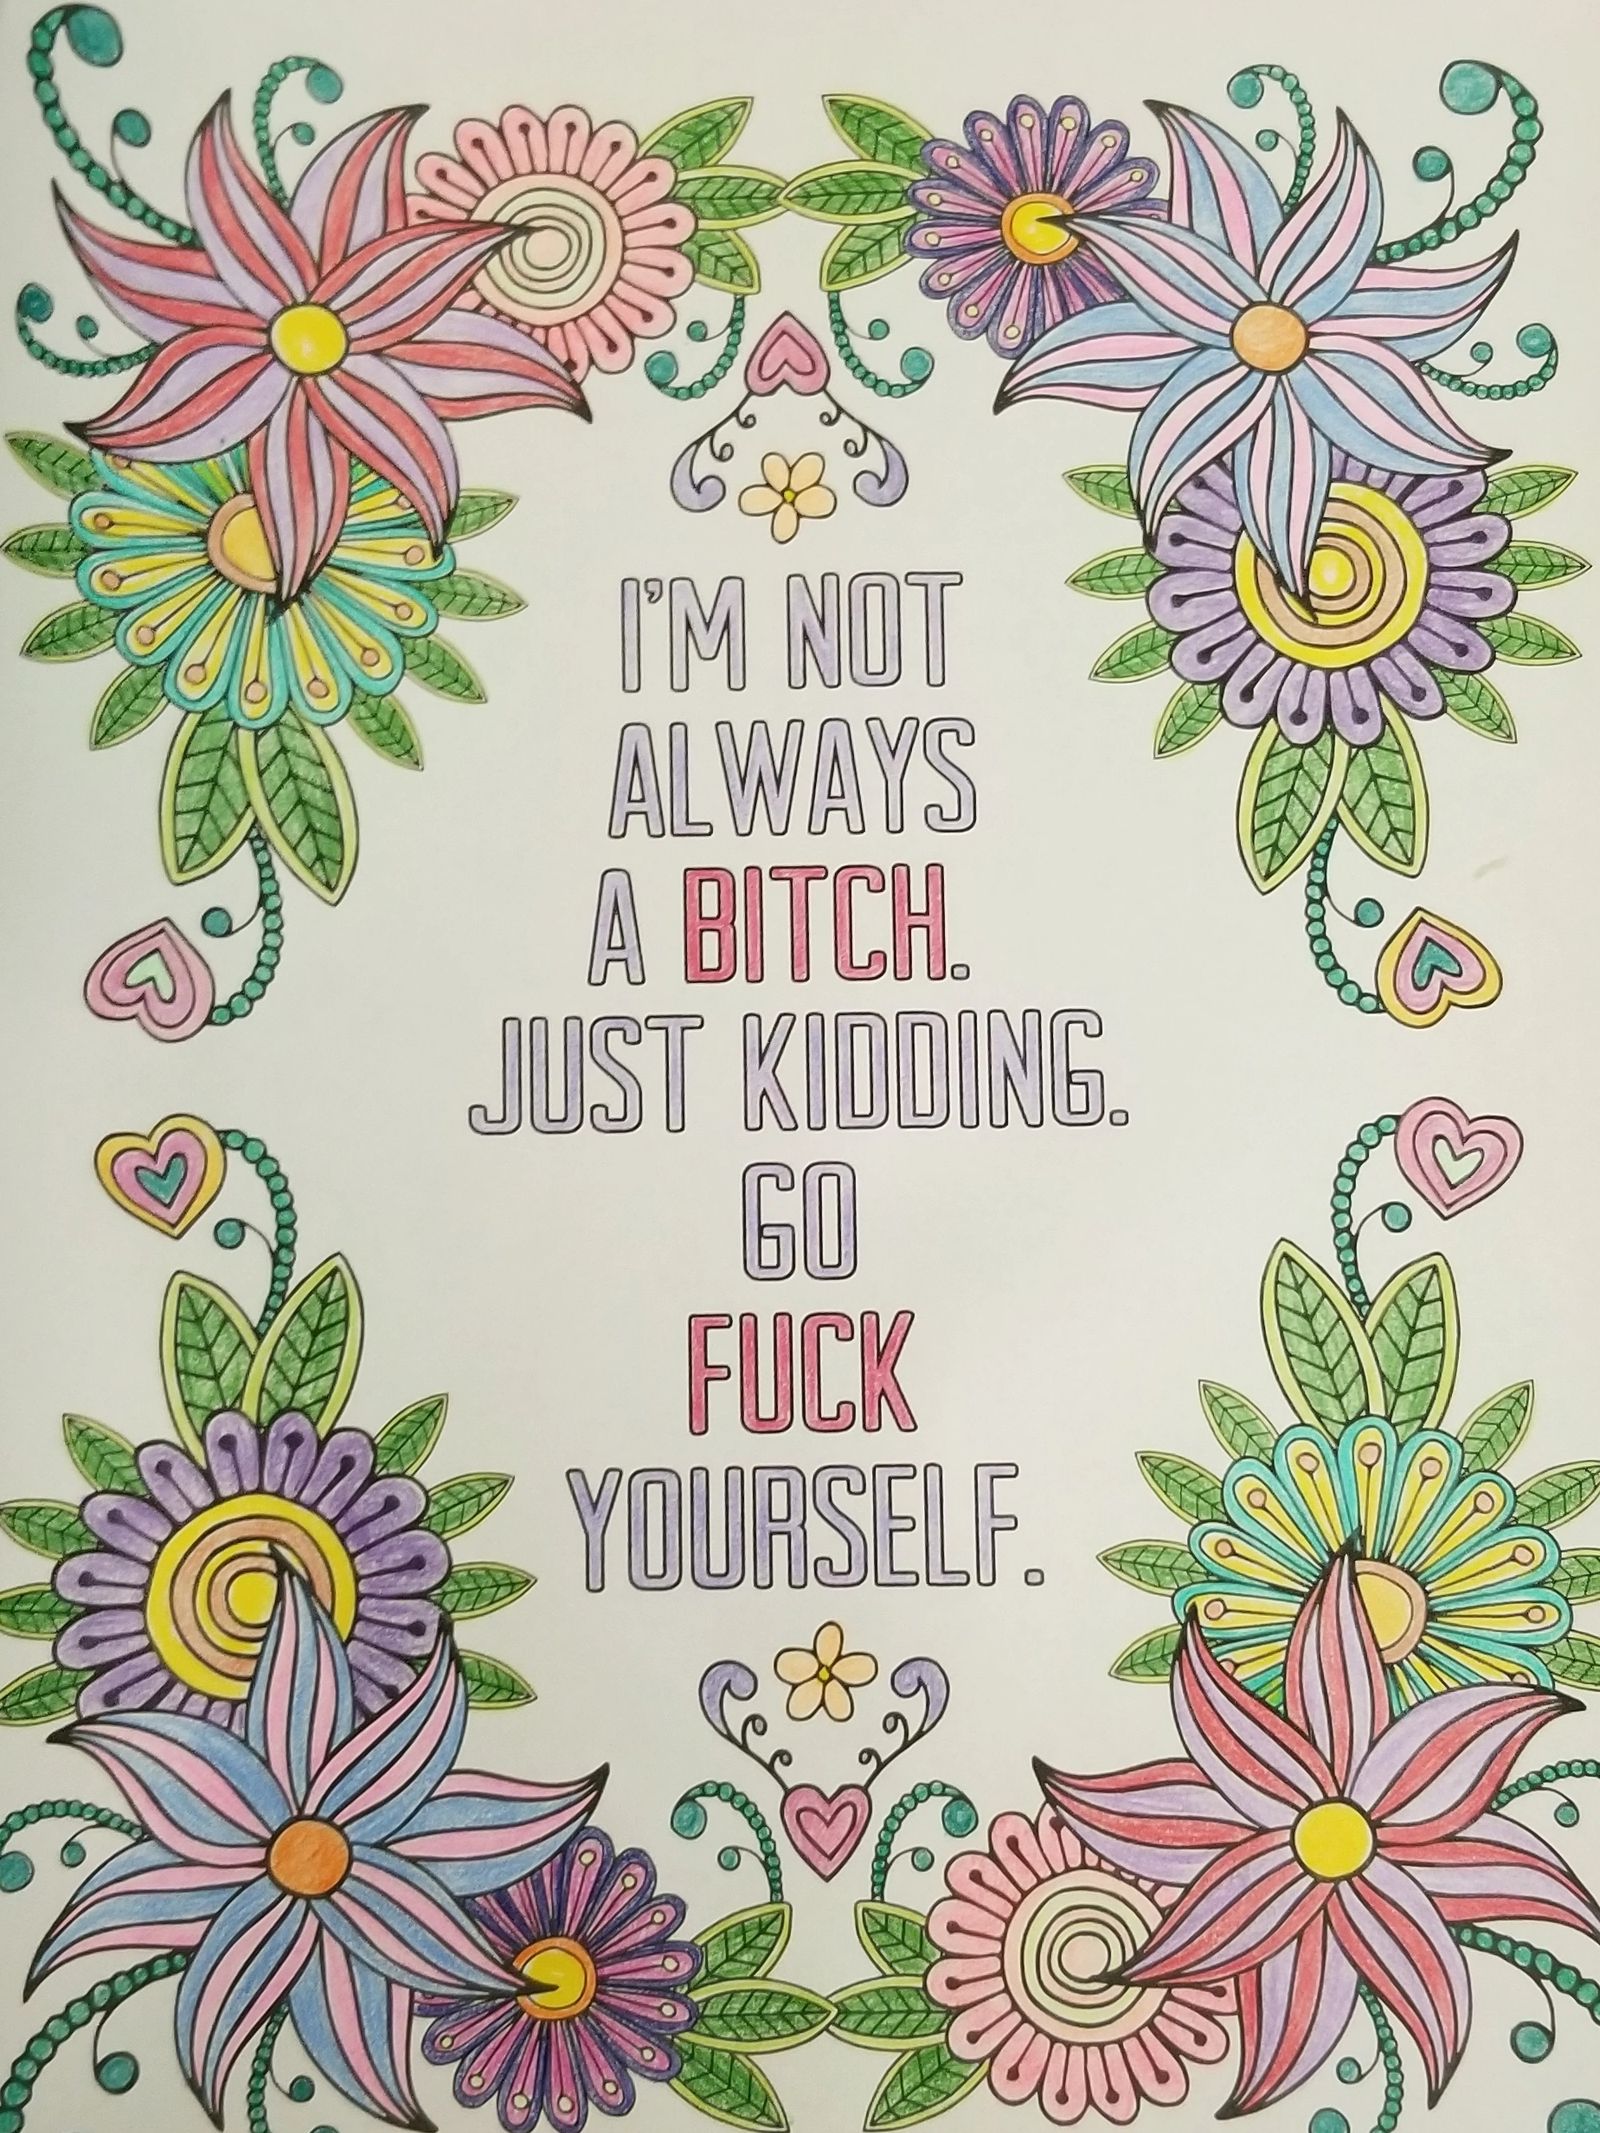 I'm not always a bitch, just kidding, go fuck yourself - coluring page with flowers